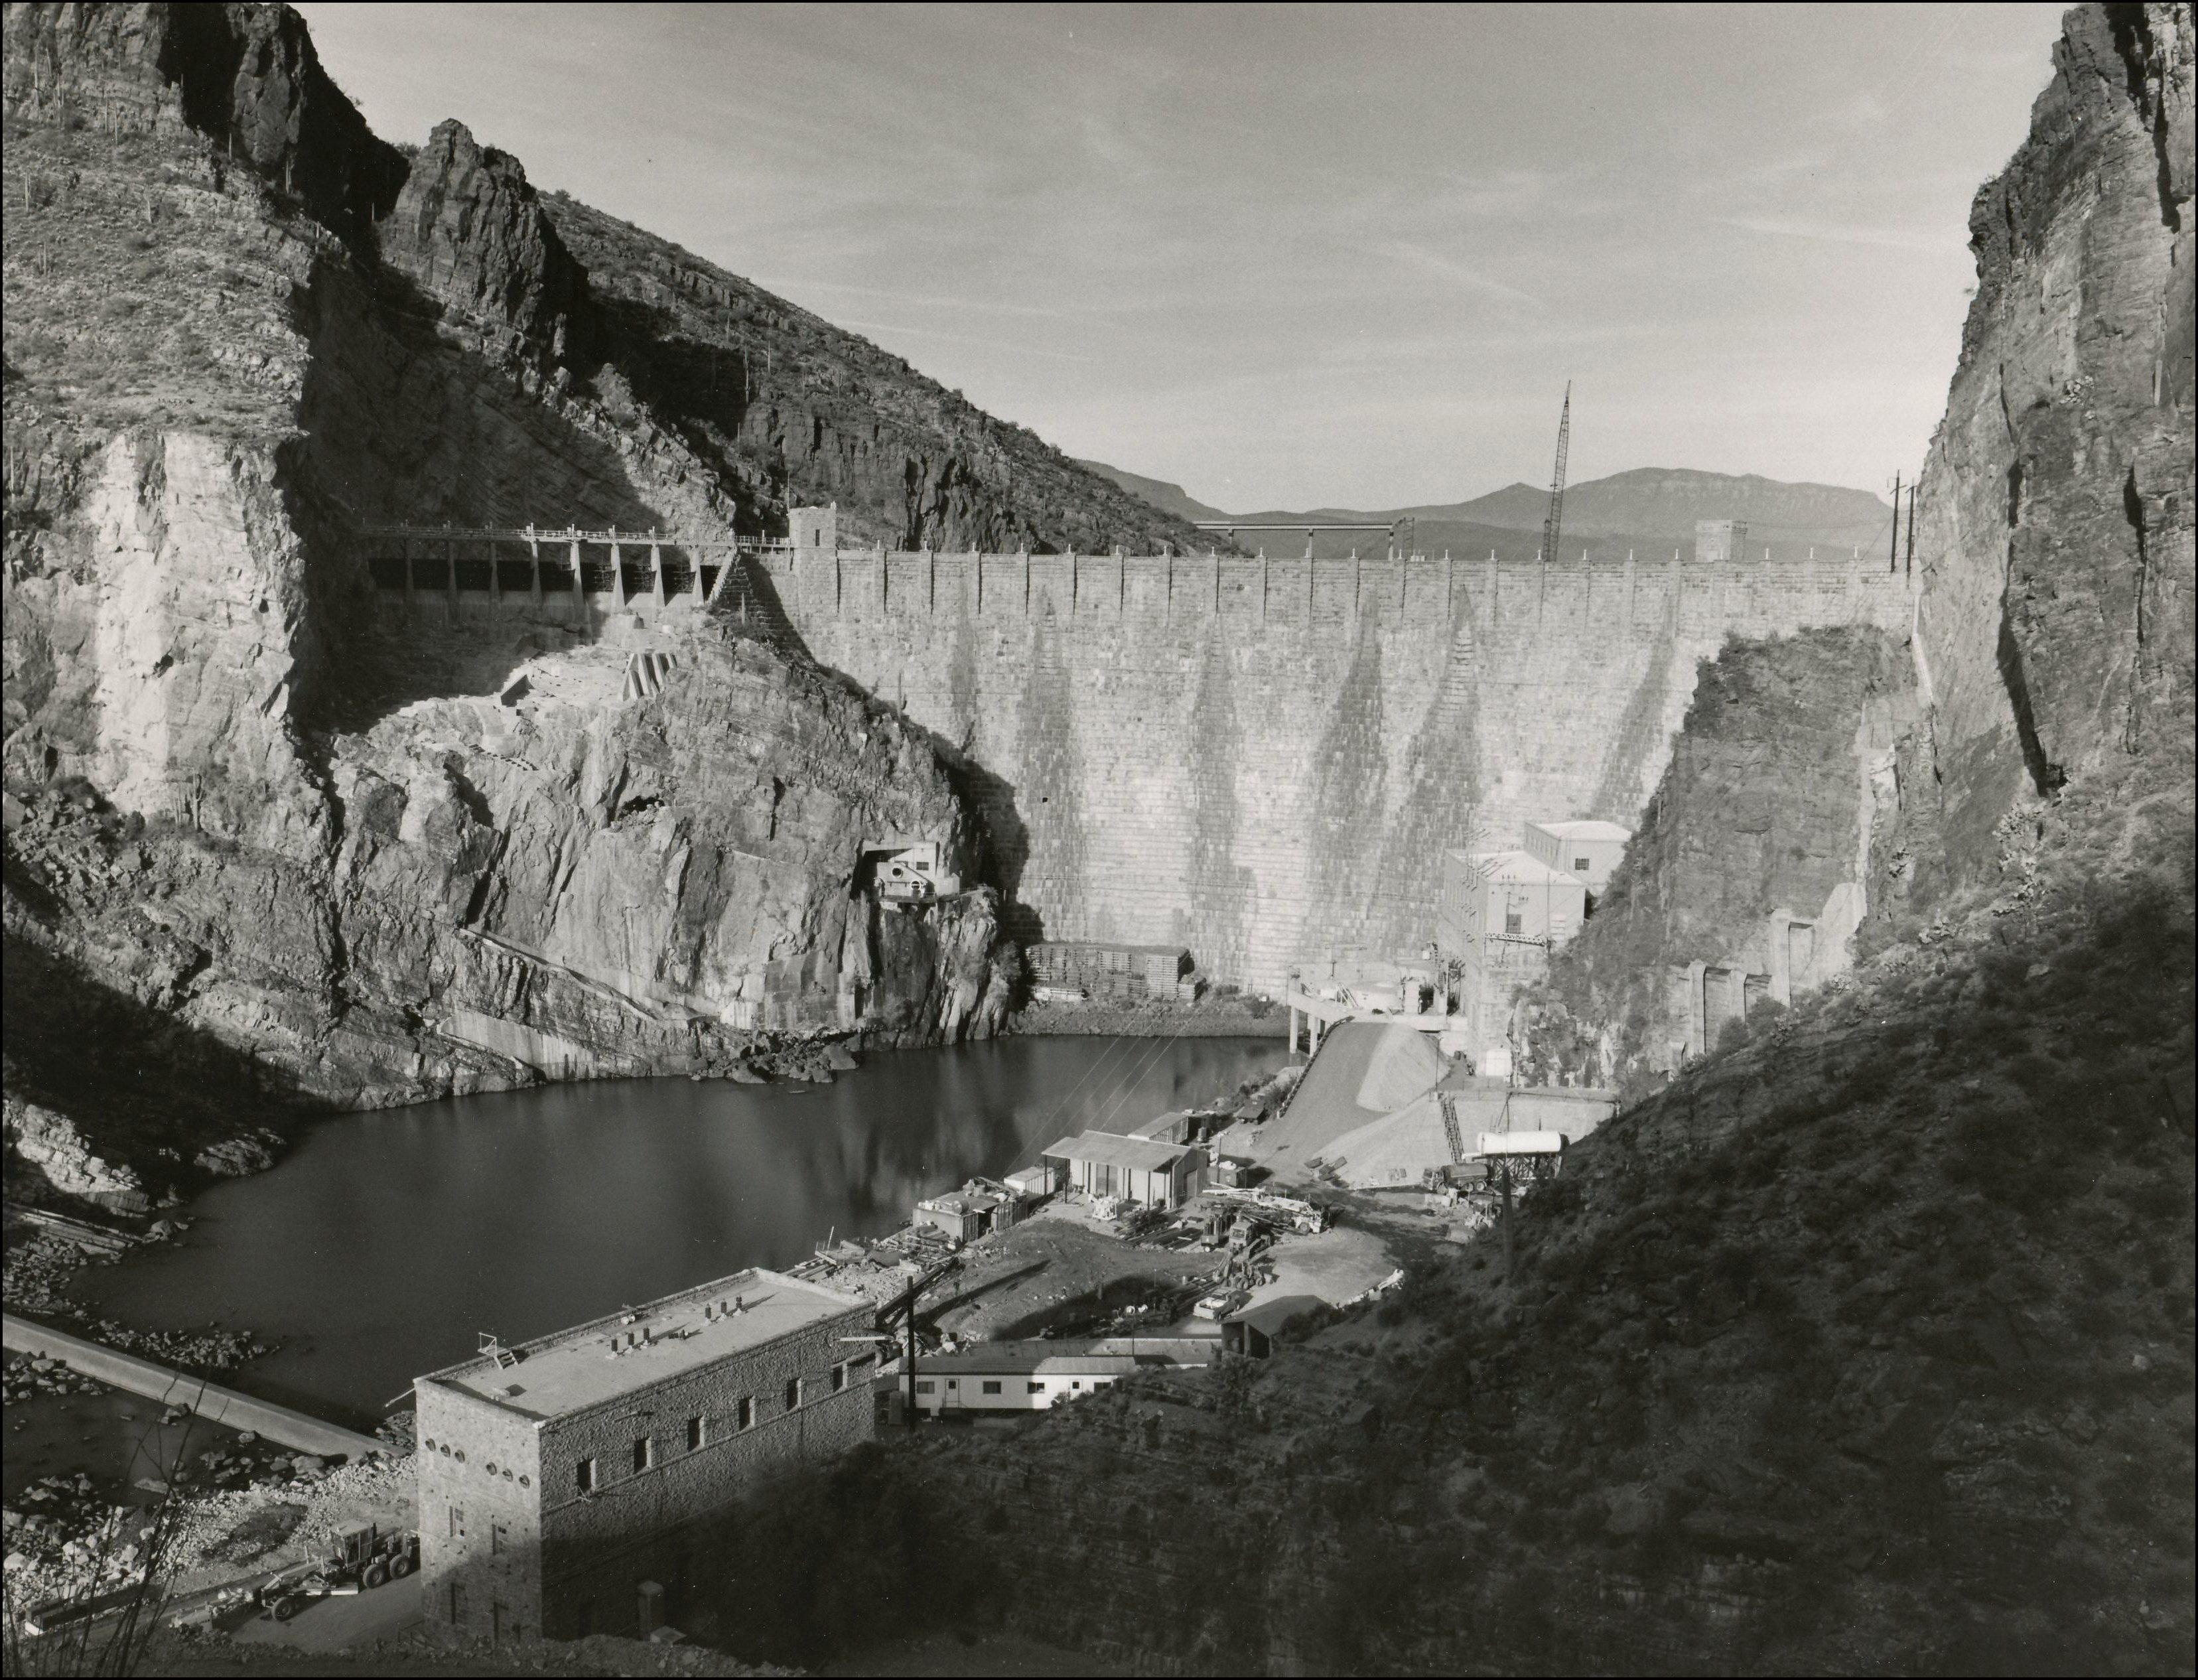 View of a dam in a canyon